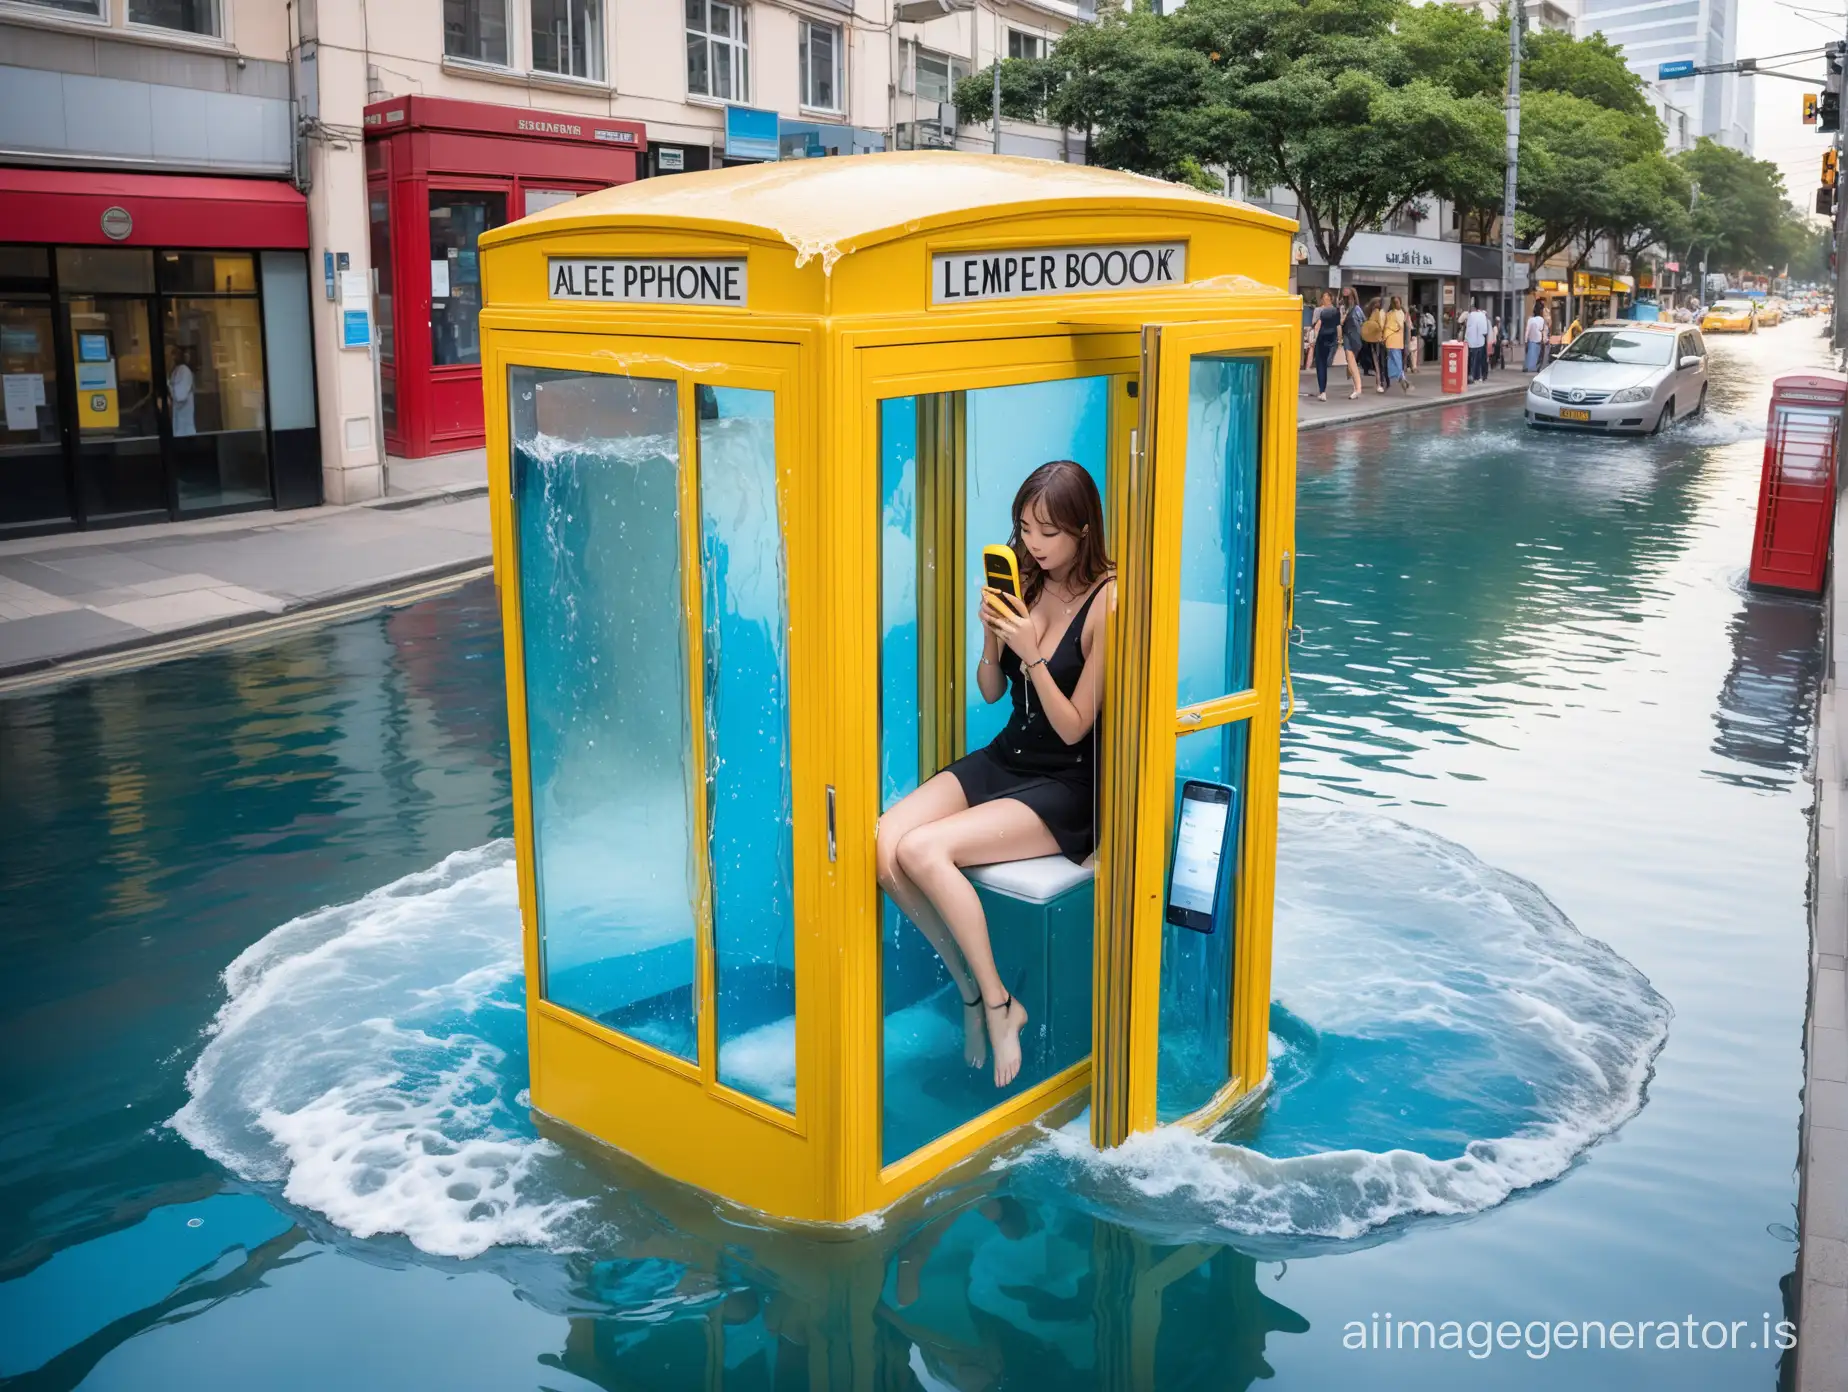 A woman floats in a fish tank in the form of a phone booth that is entirely filled from top to bottom with sloshing water as she uses the phone. The phone booth contains all of the water inside. The setting is a modern stret corner. A yellow phone book floats in the water inside.